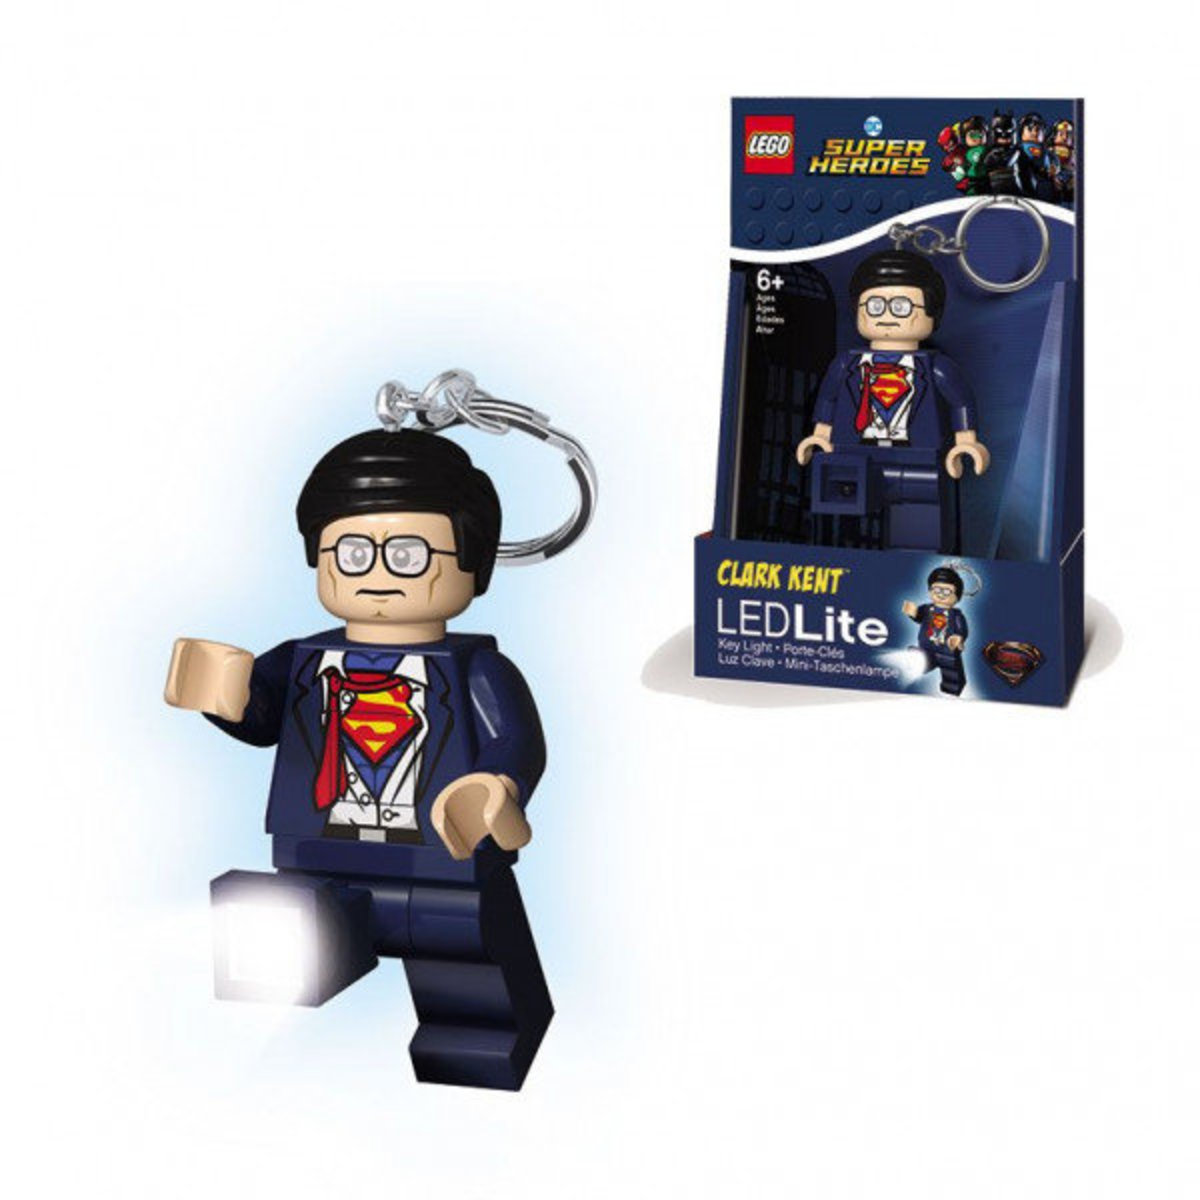 Lego Lego Dc Super Heroes Clark Kent Key Light With Battries Hktvmall Online Shopping - details about game roblox key lanyard mobile phone neck strap badge holder hang rope